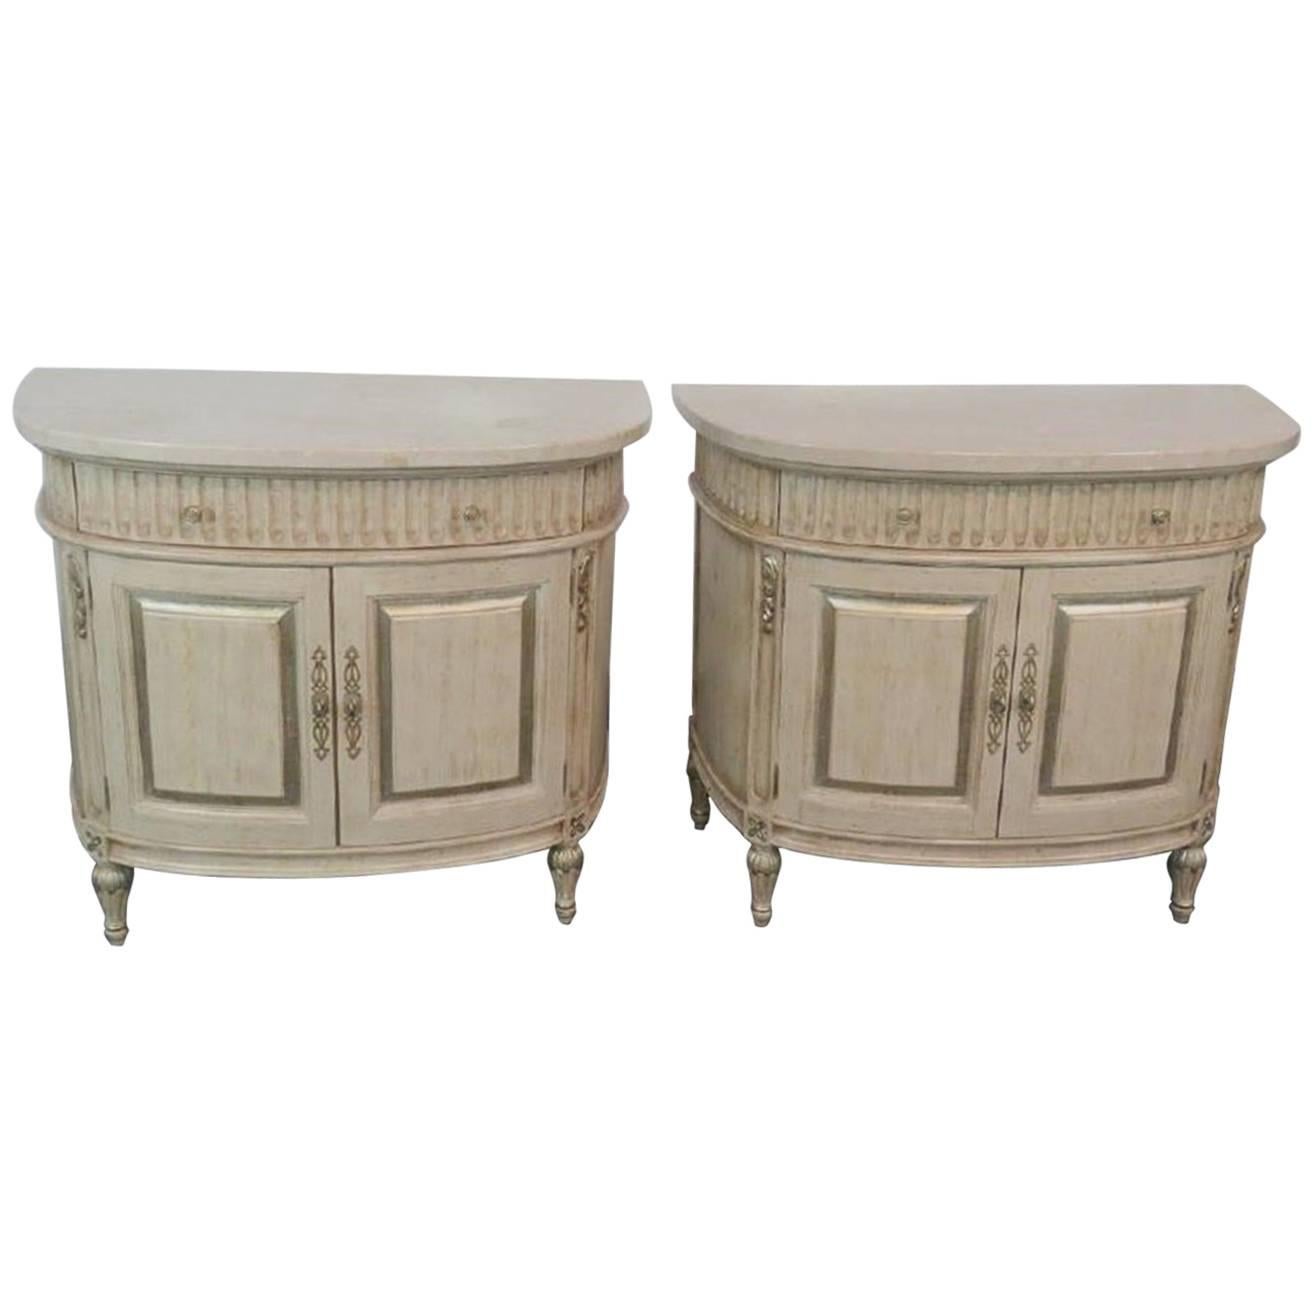 Pair of Jeffco Distressed Painted Marble Top Commodes